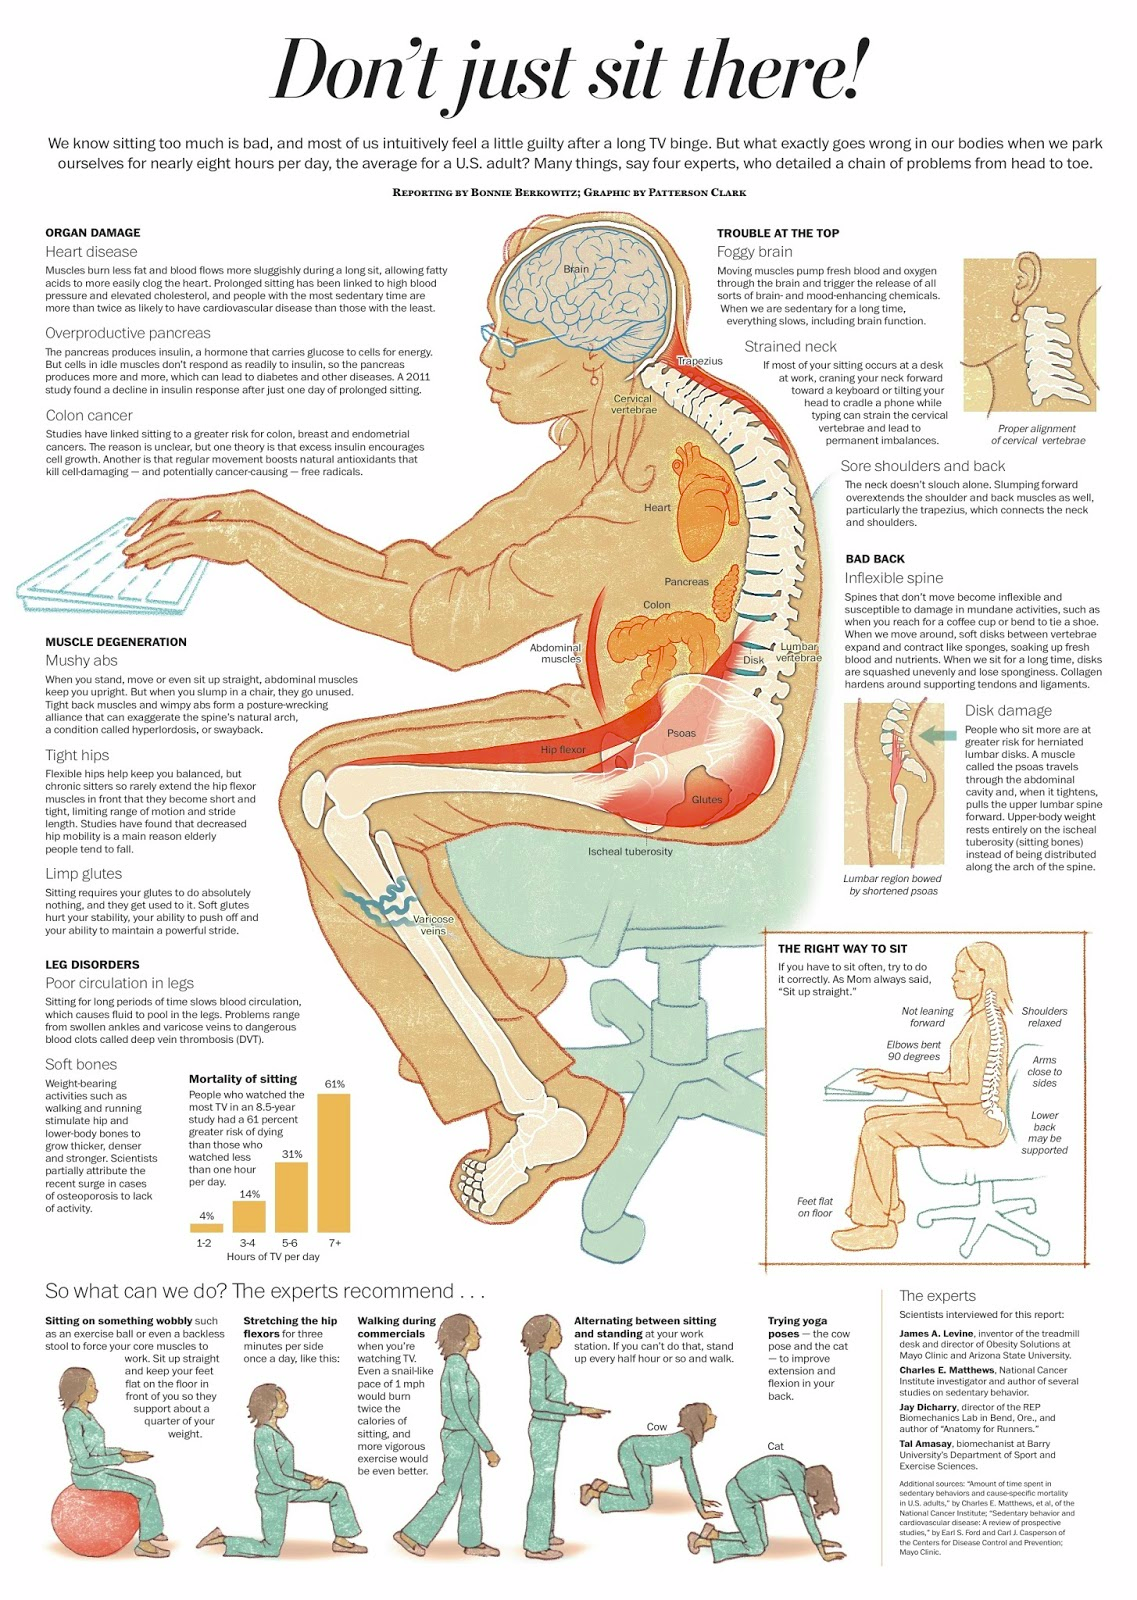 Don’t Just Sit There! (The Frightening Side Effects Of Sedentary Lifestyle) Infographic